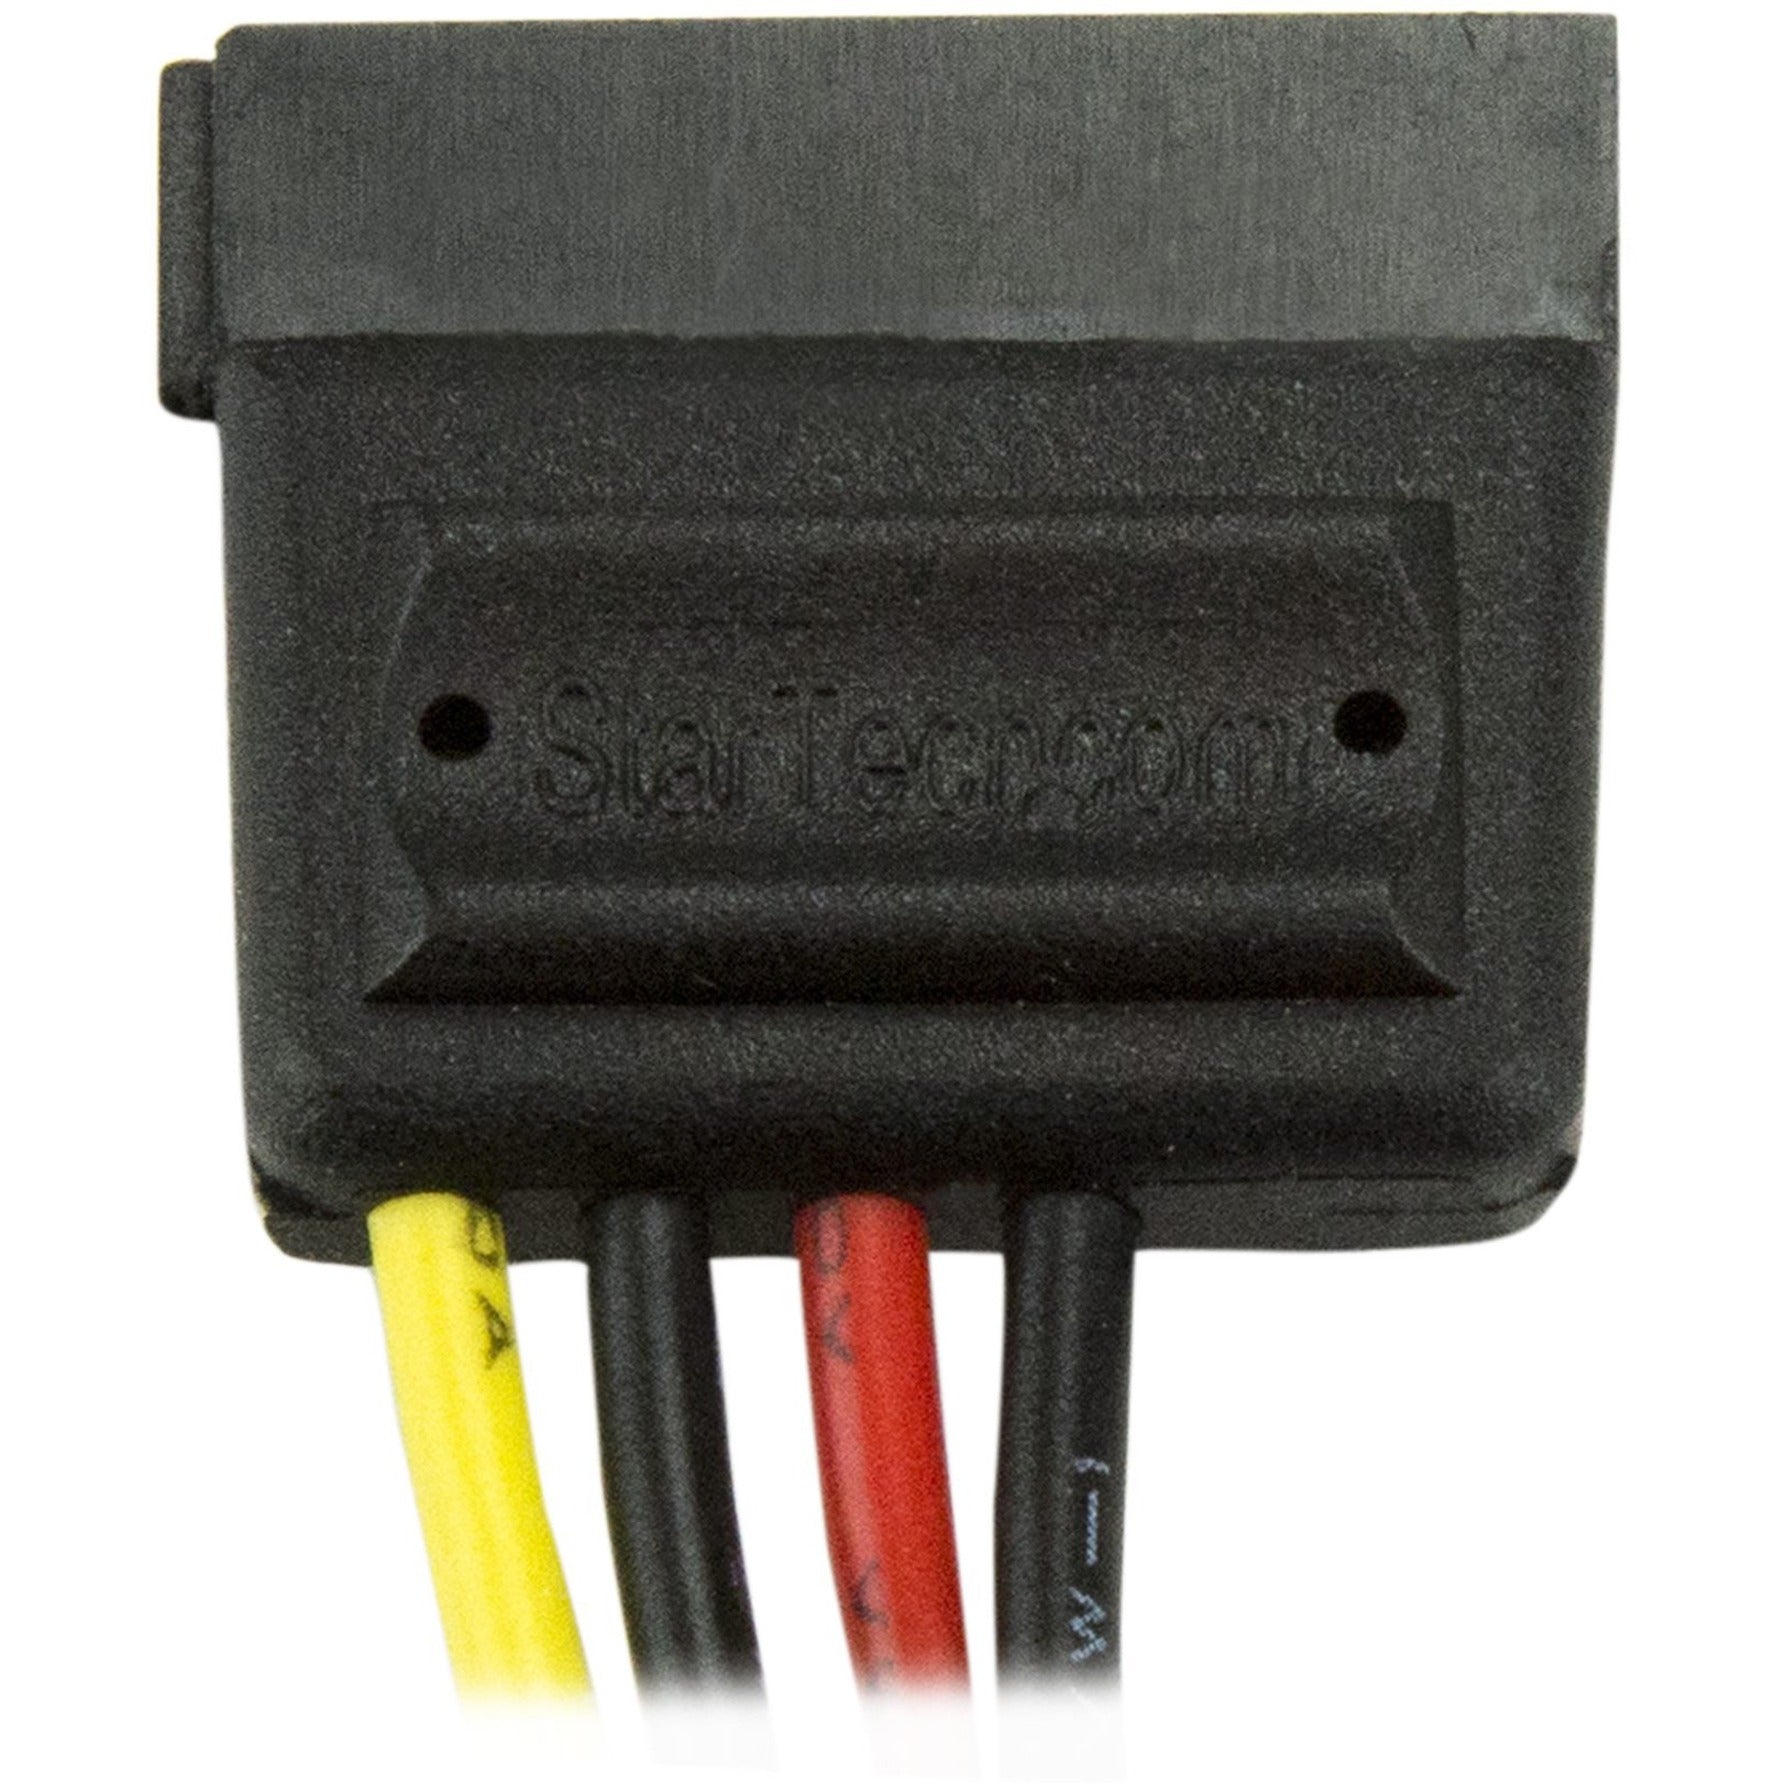 StarTech.com SATAPOWADAP 6in 4 Pin Molex to SATA Power Cable Adapter Connect Your Hard Drive Effortlessly StarTech.com SATAPOWADAP 6in 4 Pin Molex to SATA Power Cable Adapter Connect Your Hard Drive Effortlessly